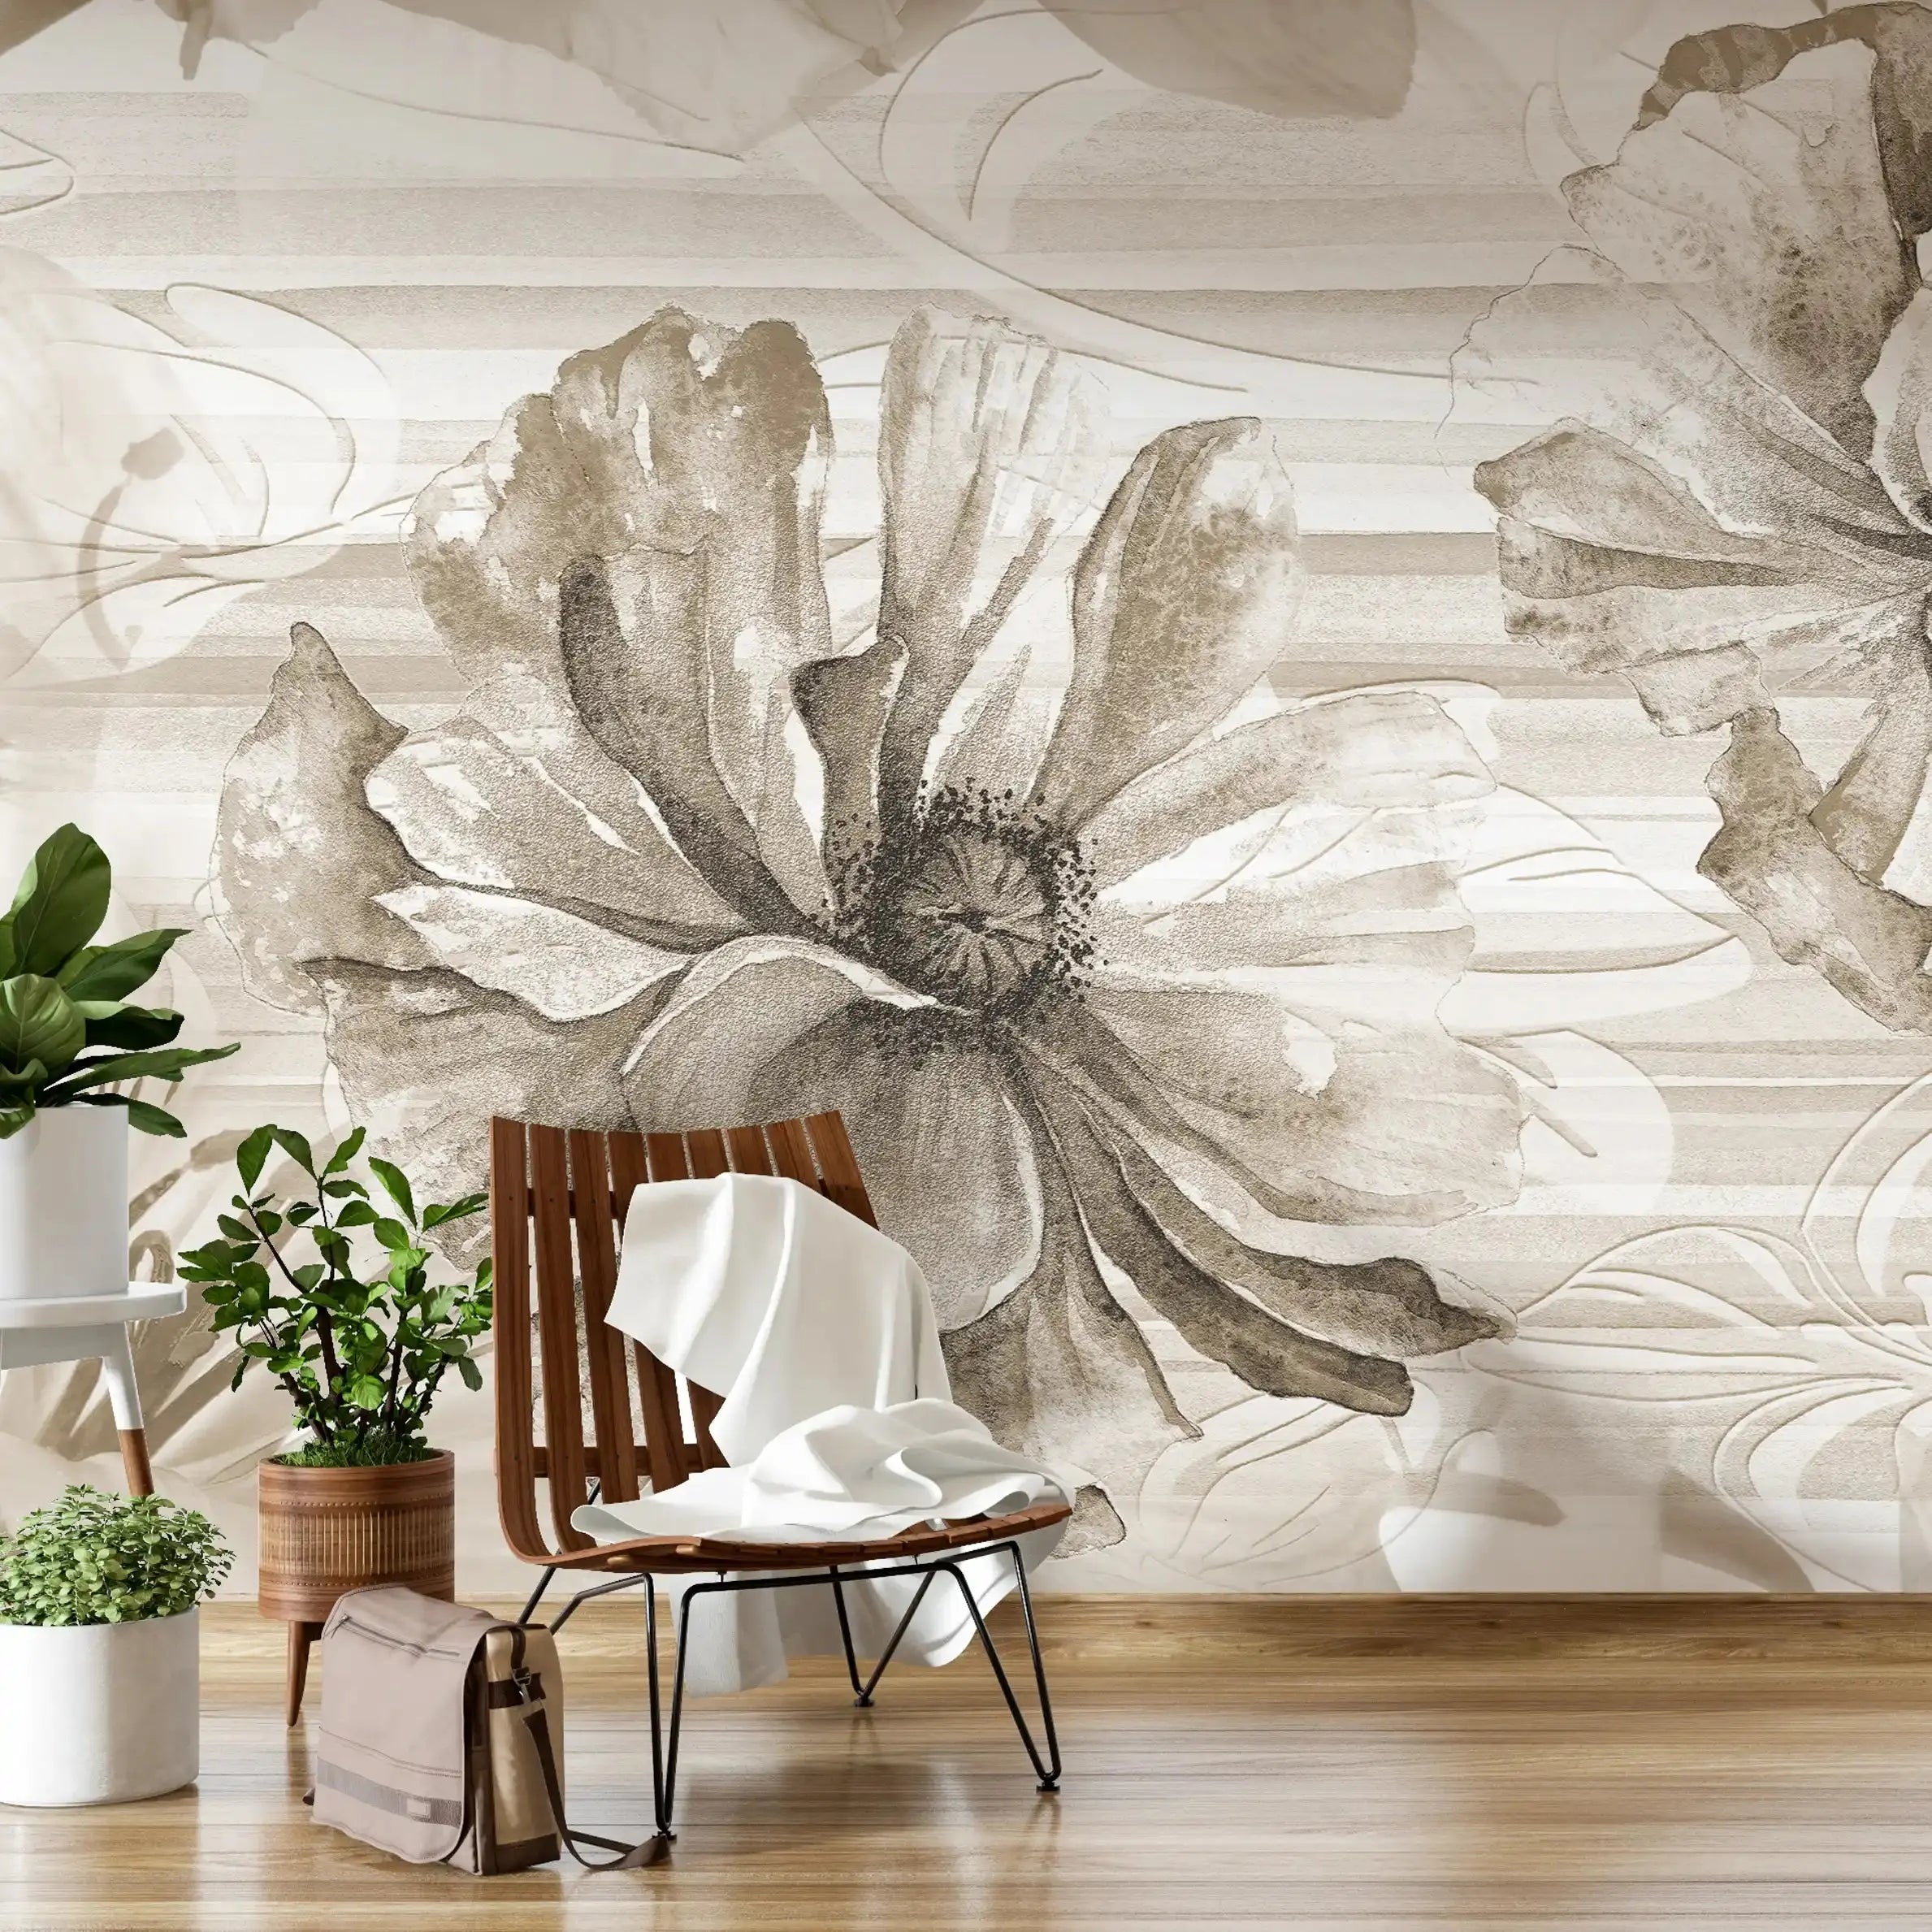 3011-C / Tropical Wallpaper - Watercolor Floral Pattern Peel and Stick Mural for Kitchen and Bathroom - Artevella